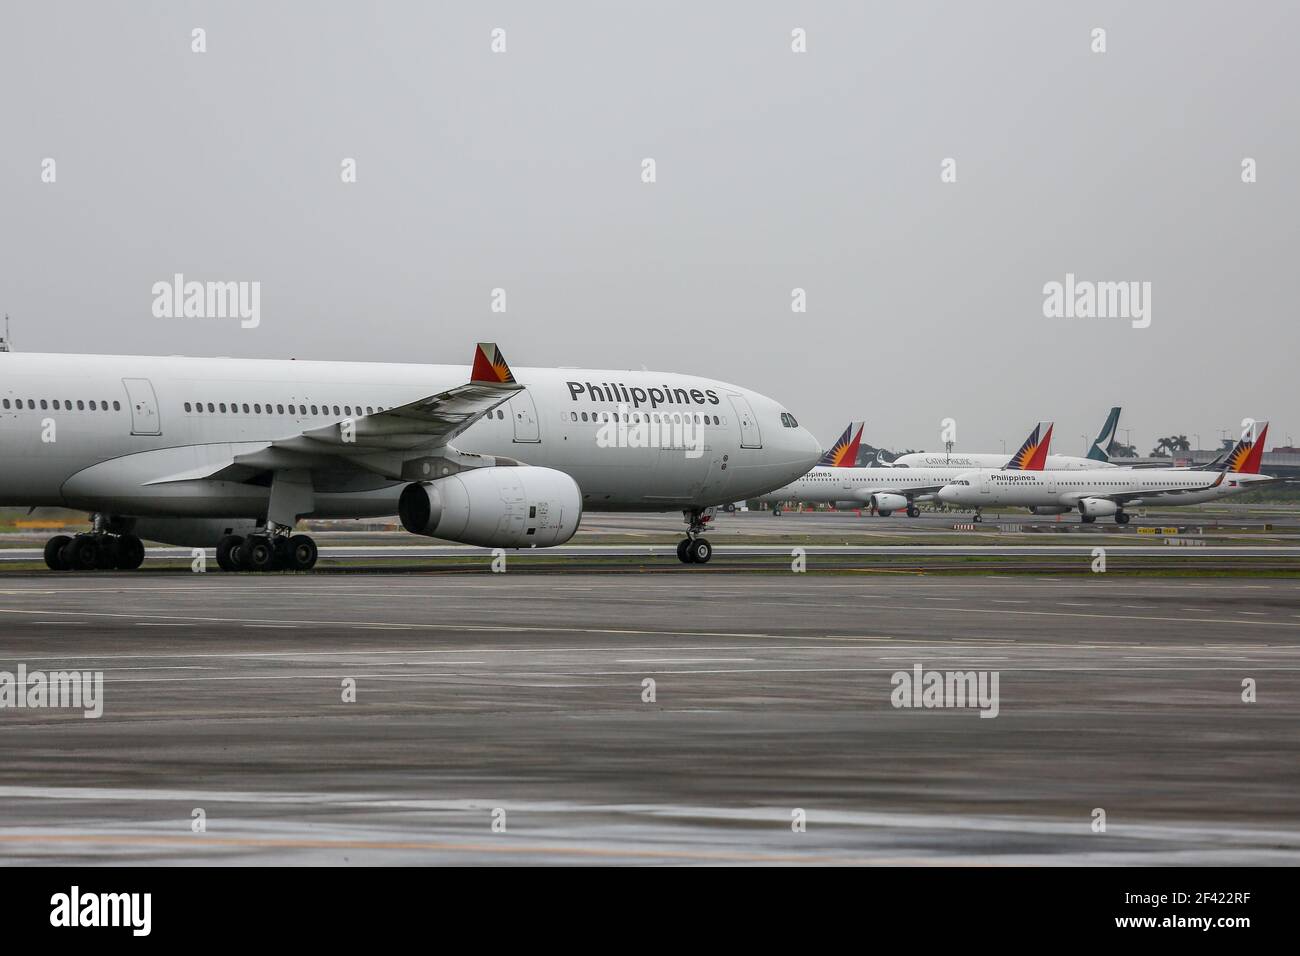 A Philippine Airlines plane is set to take off on the tarmac of the Ninoy Aquino International Airport (NAIA) Terminal 2 in Pasay City, Metro Manila, Philippines. Stock Photo